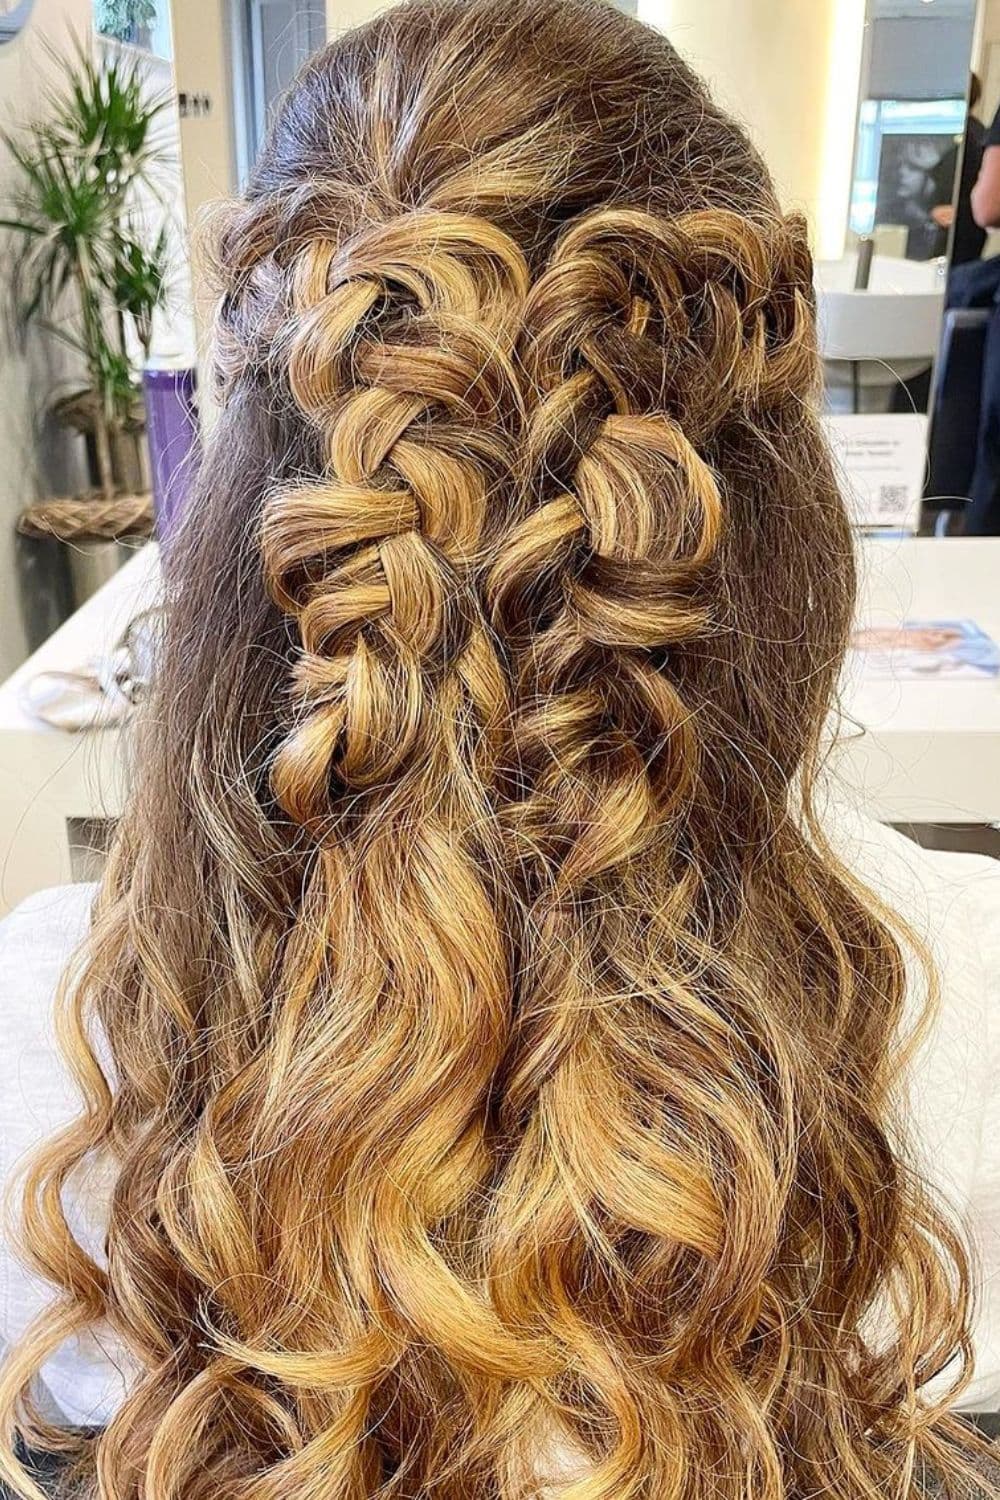 A woman with a blonde loose French braid.